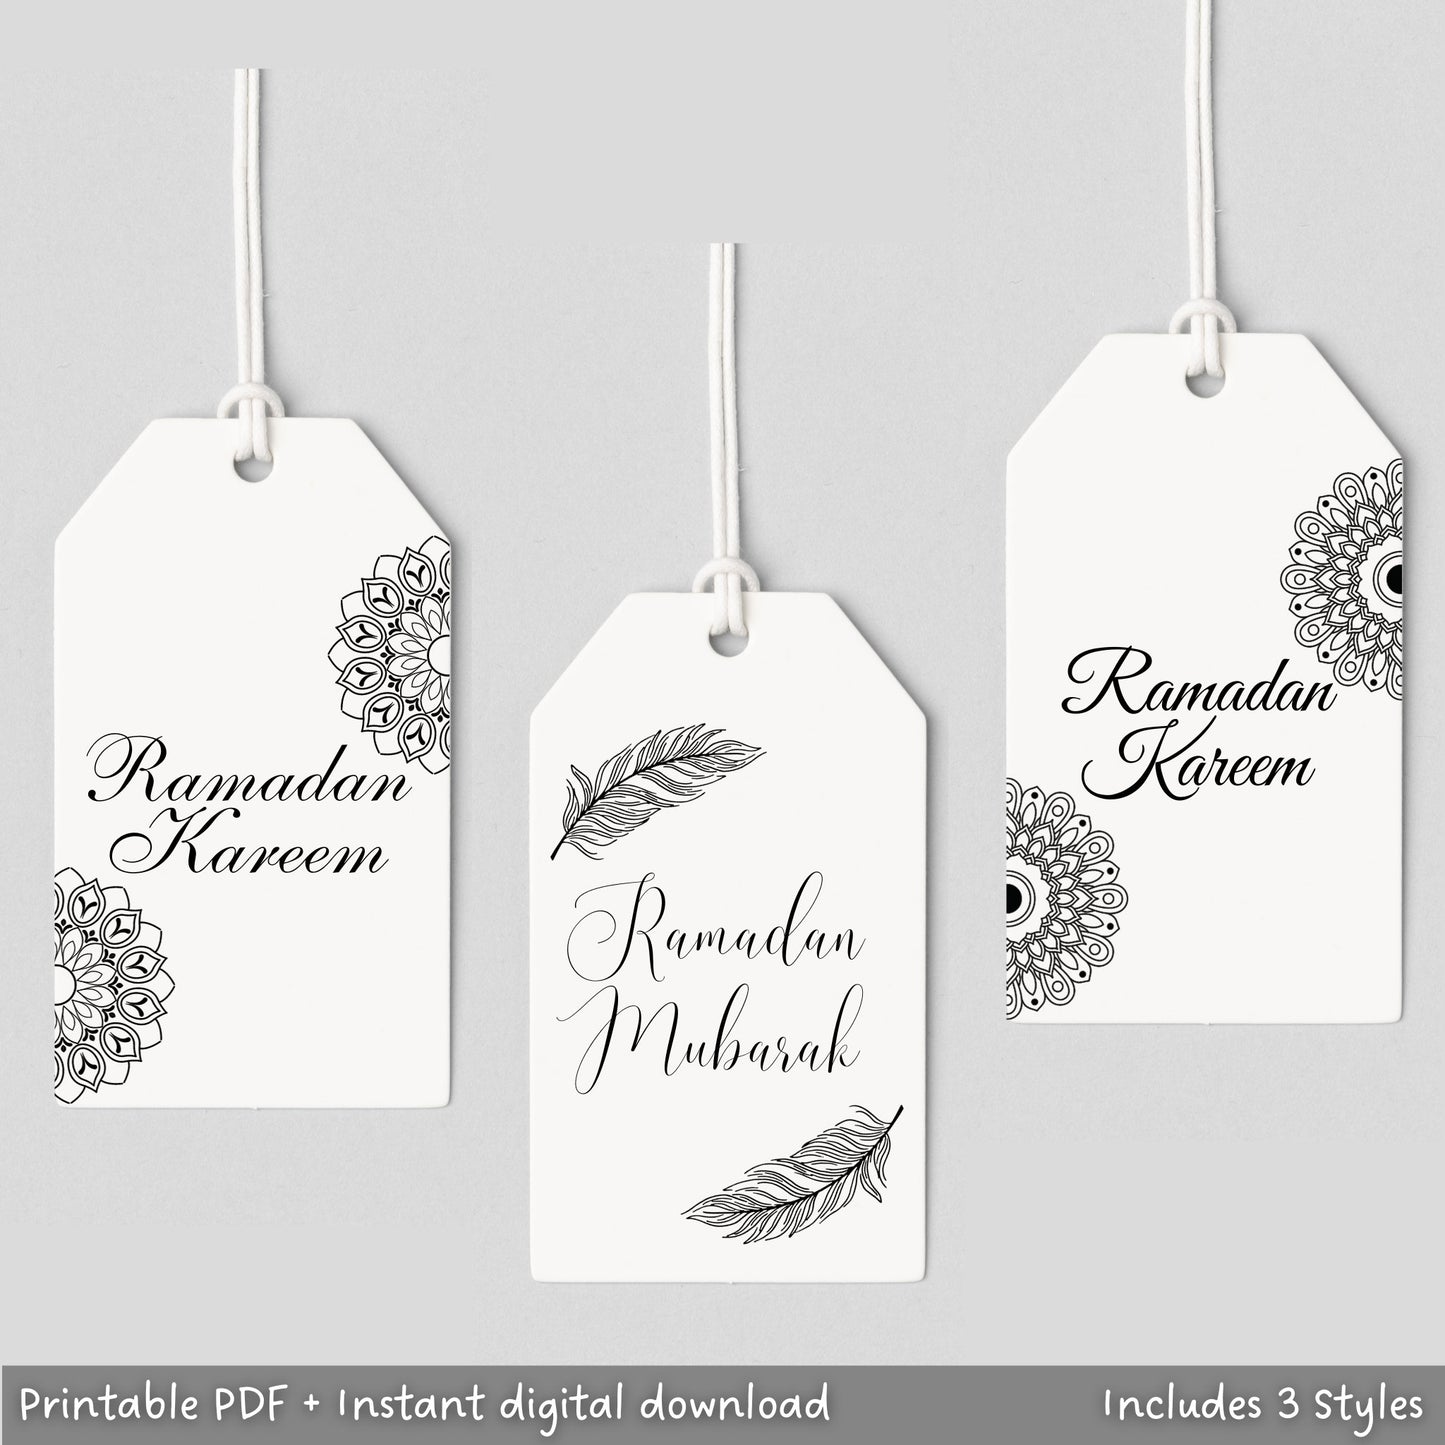 Make gift giving extra special with these printable simplistic and modern digital Ramadan Mubarak gift tags! Includes 3 different styles that are minimalistic! Simply purchase, download, print and gift away!